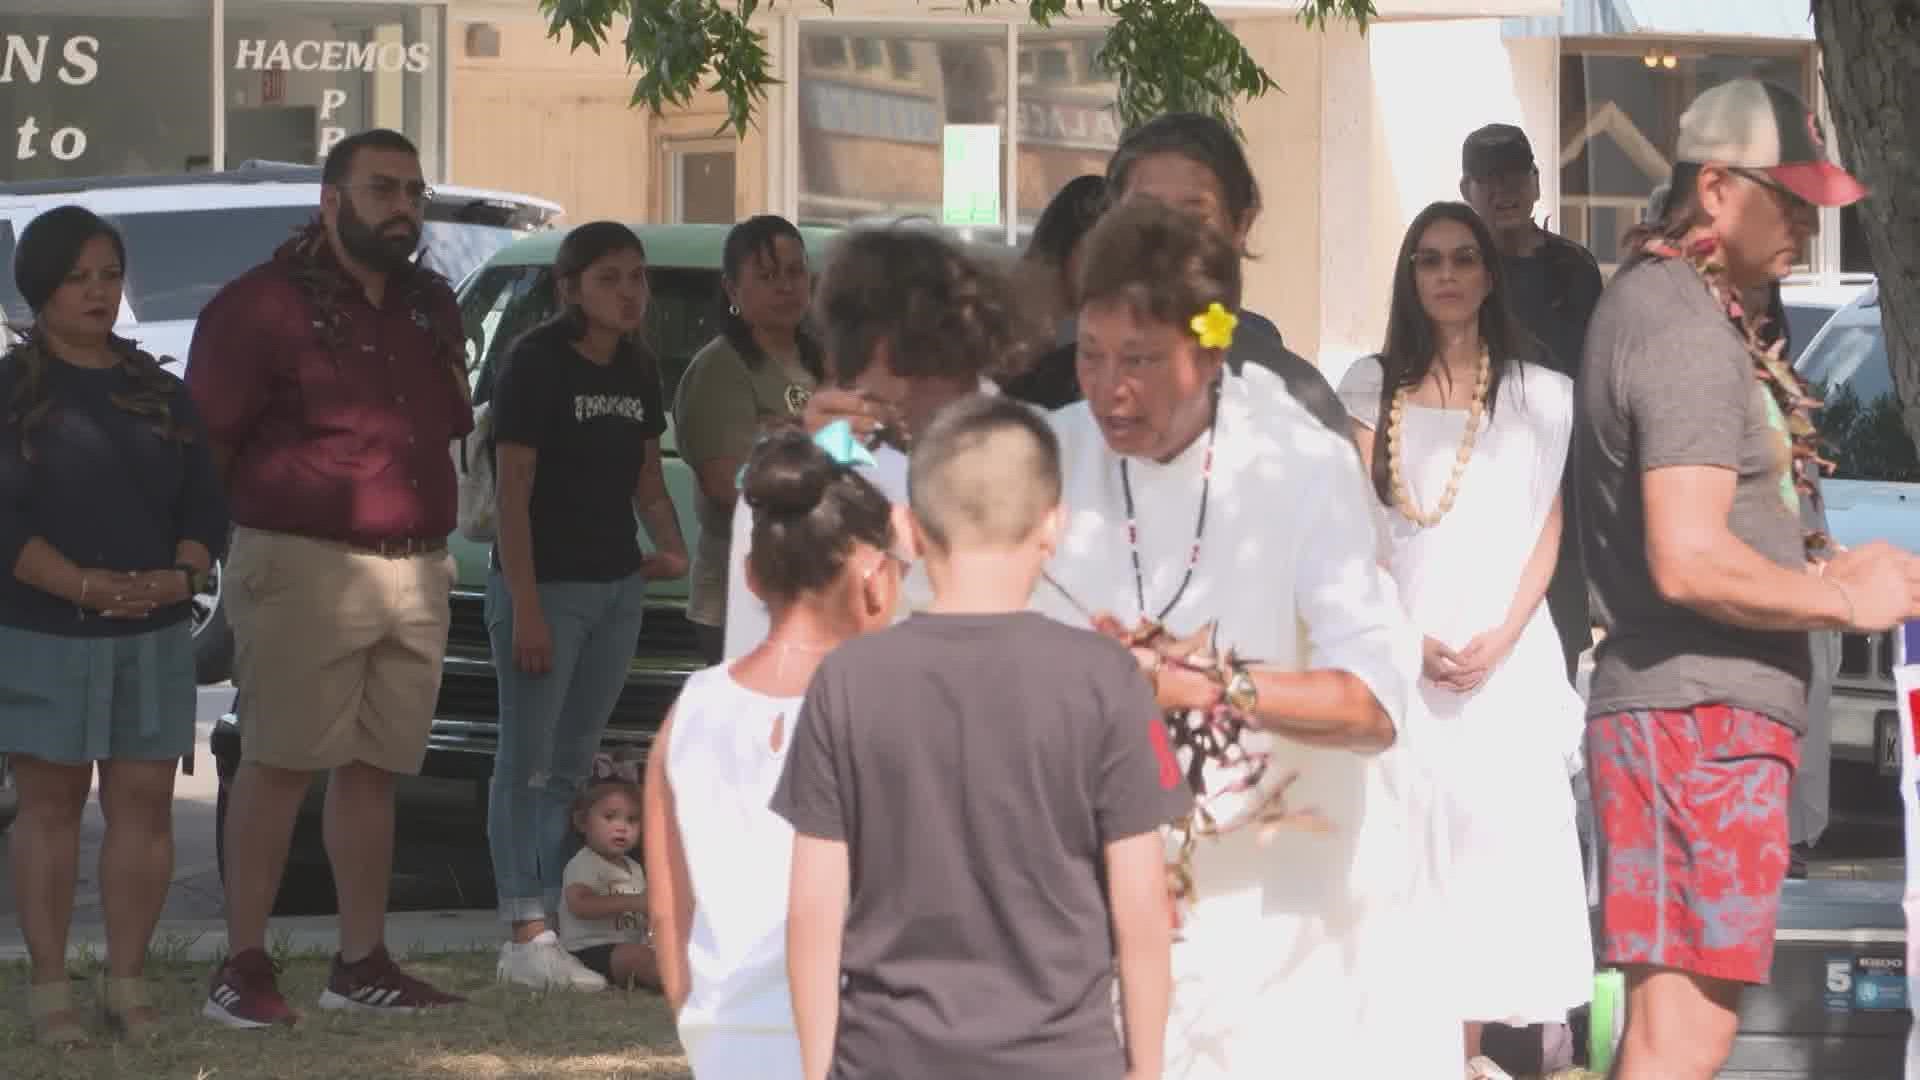 The Benedictine Monastery of Hawaii traveled to Uvalde to offer their support to grieving families.